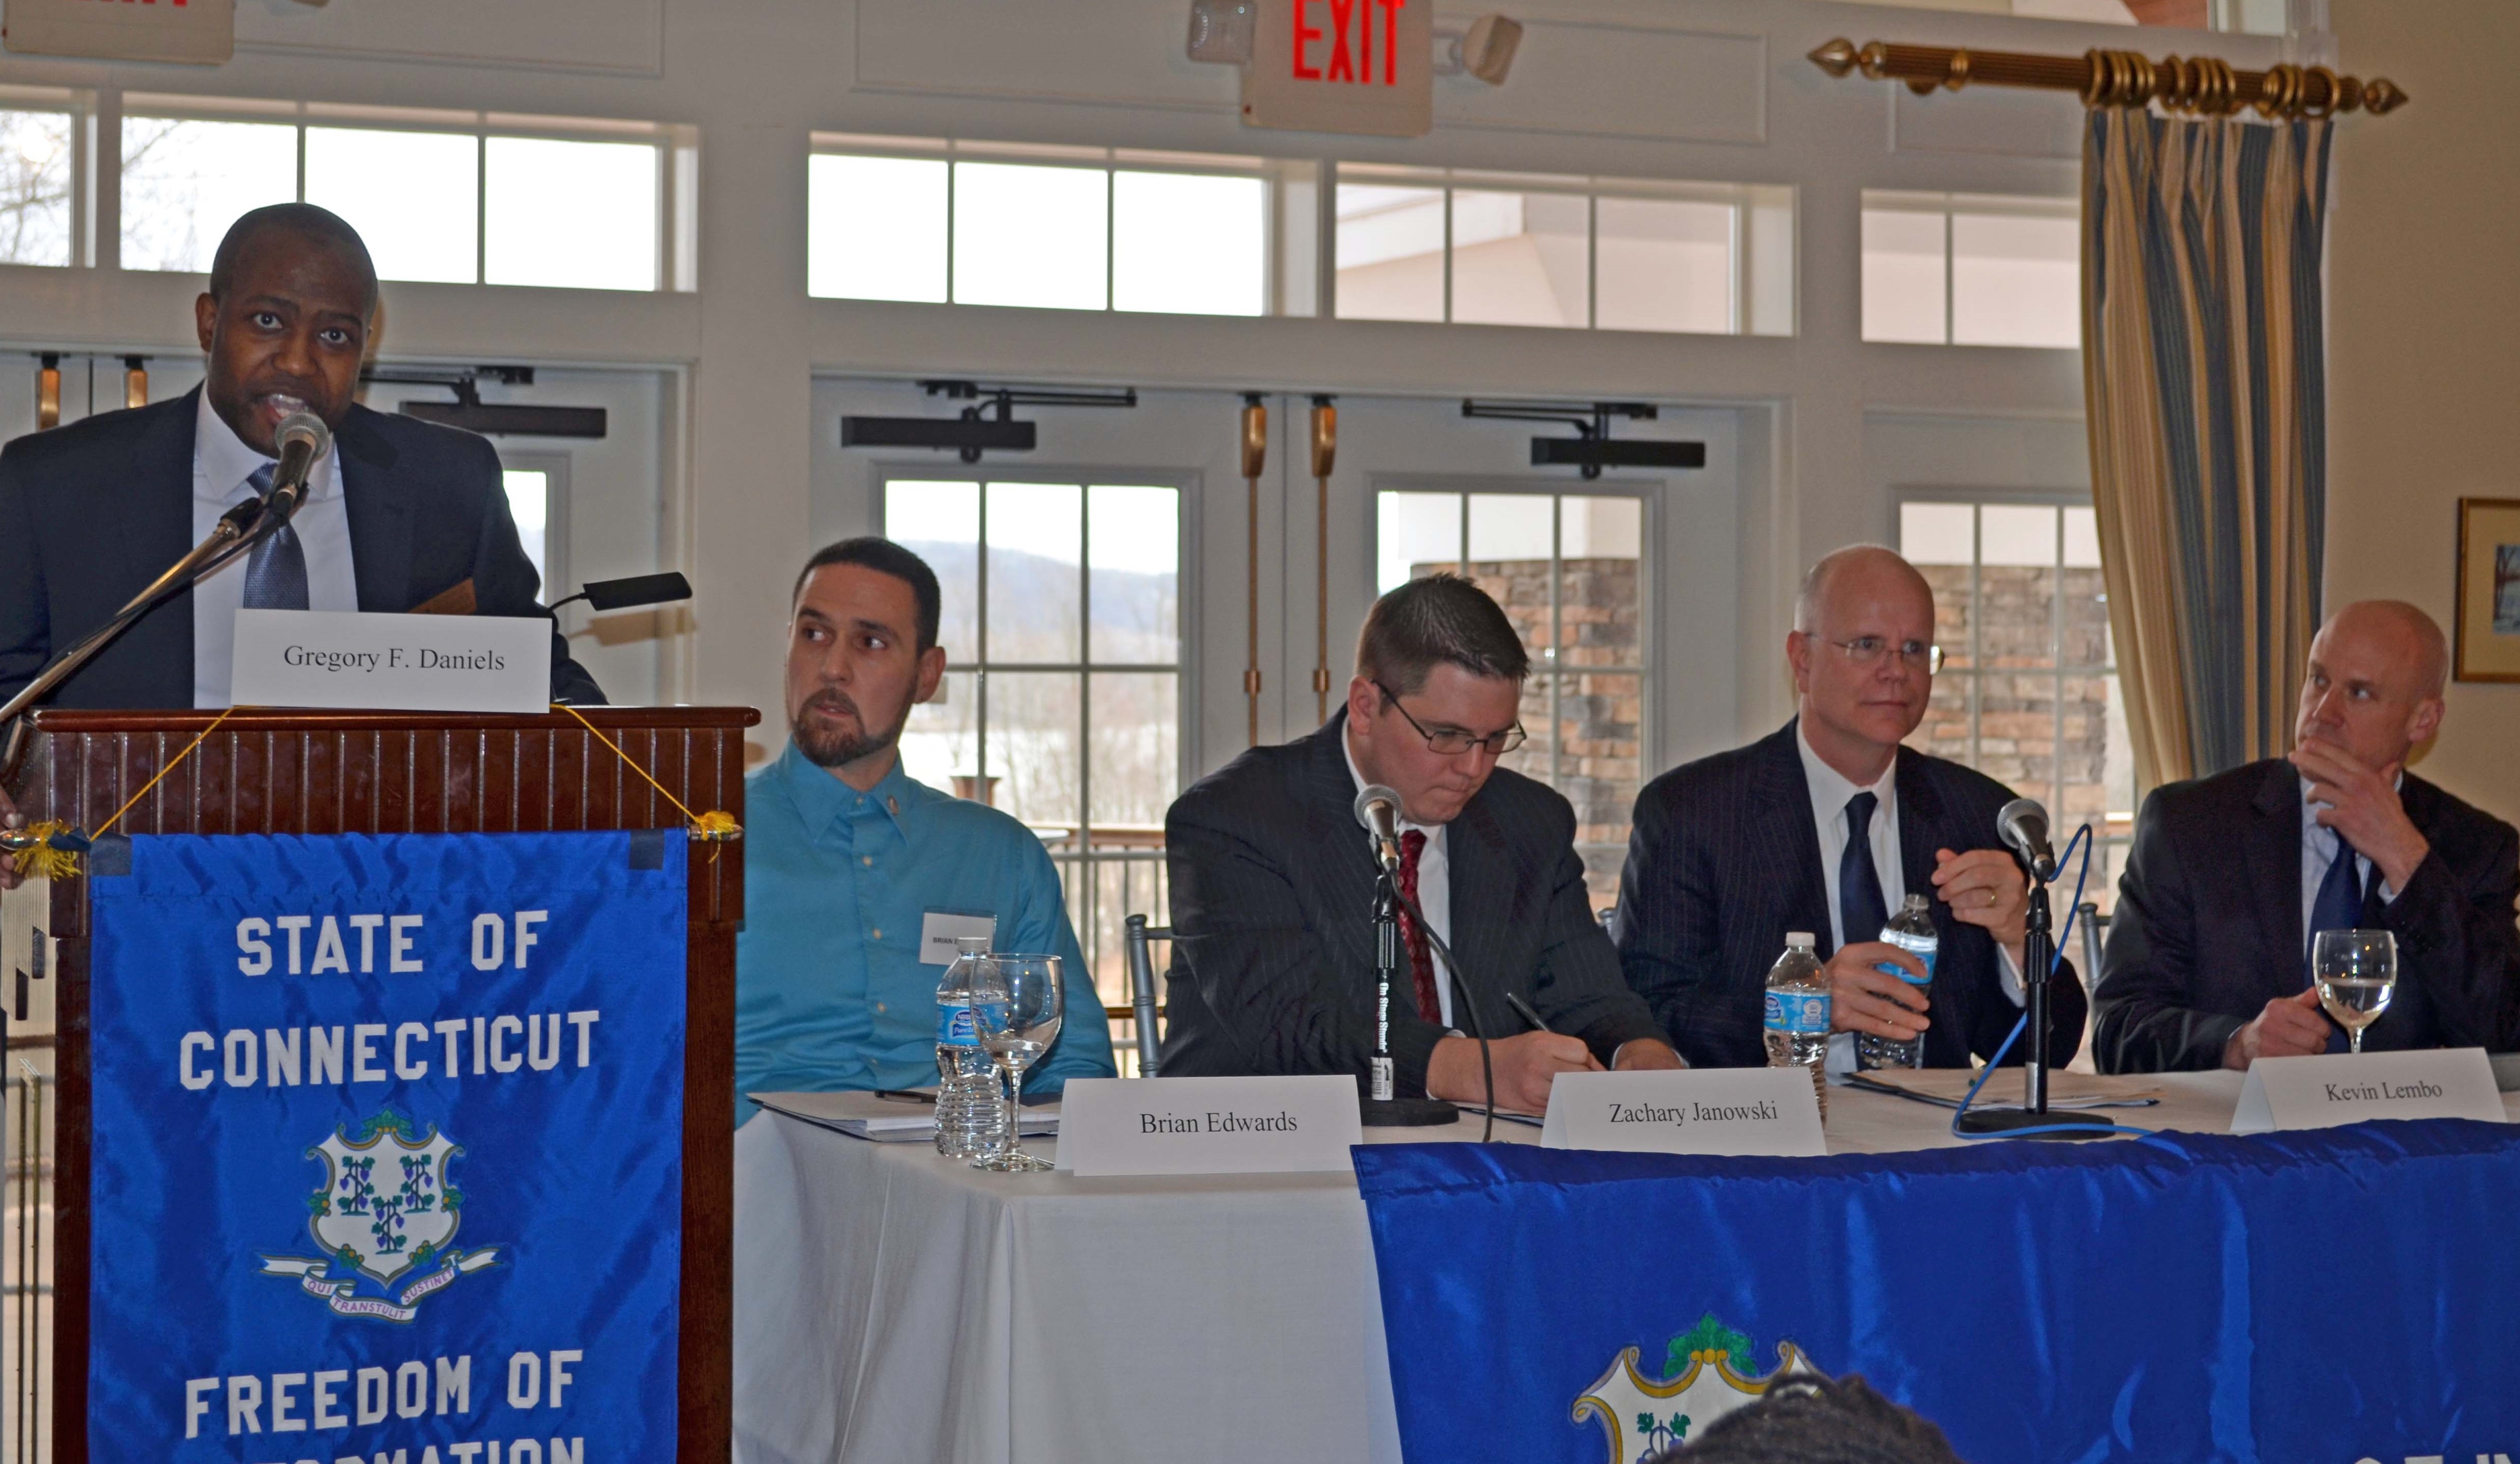 Gregory Daniels with panelists (from left) Brian Edwards, Zachary Janowski, Kevin Lembo, Jason Pufahl discussing 